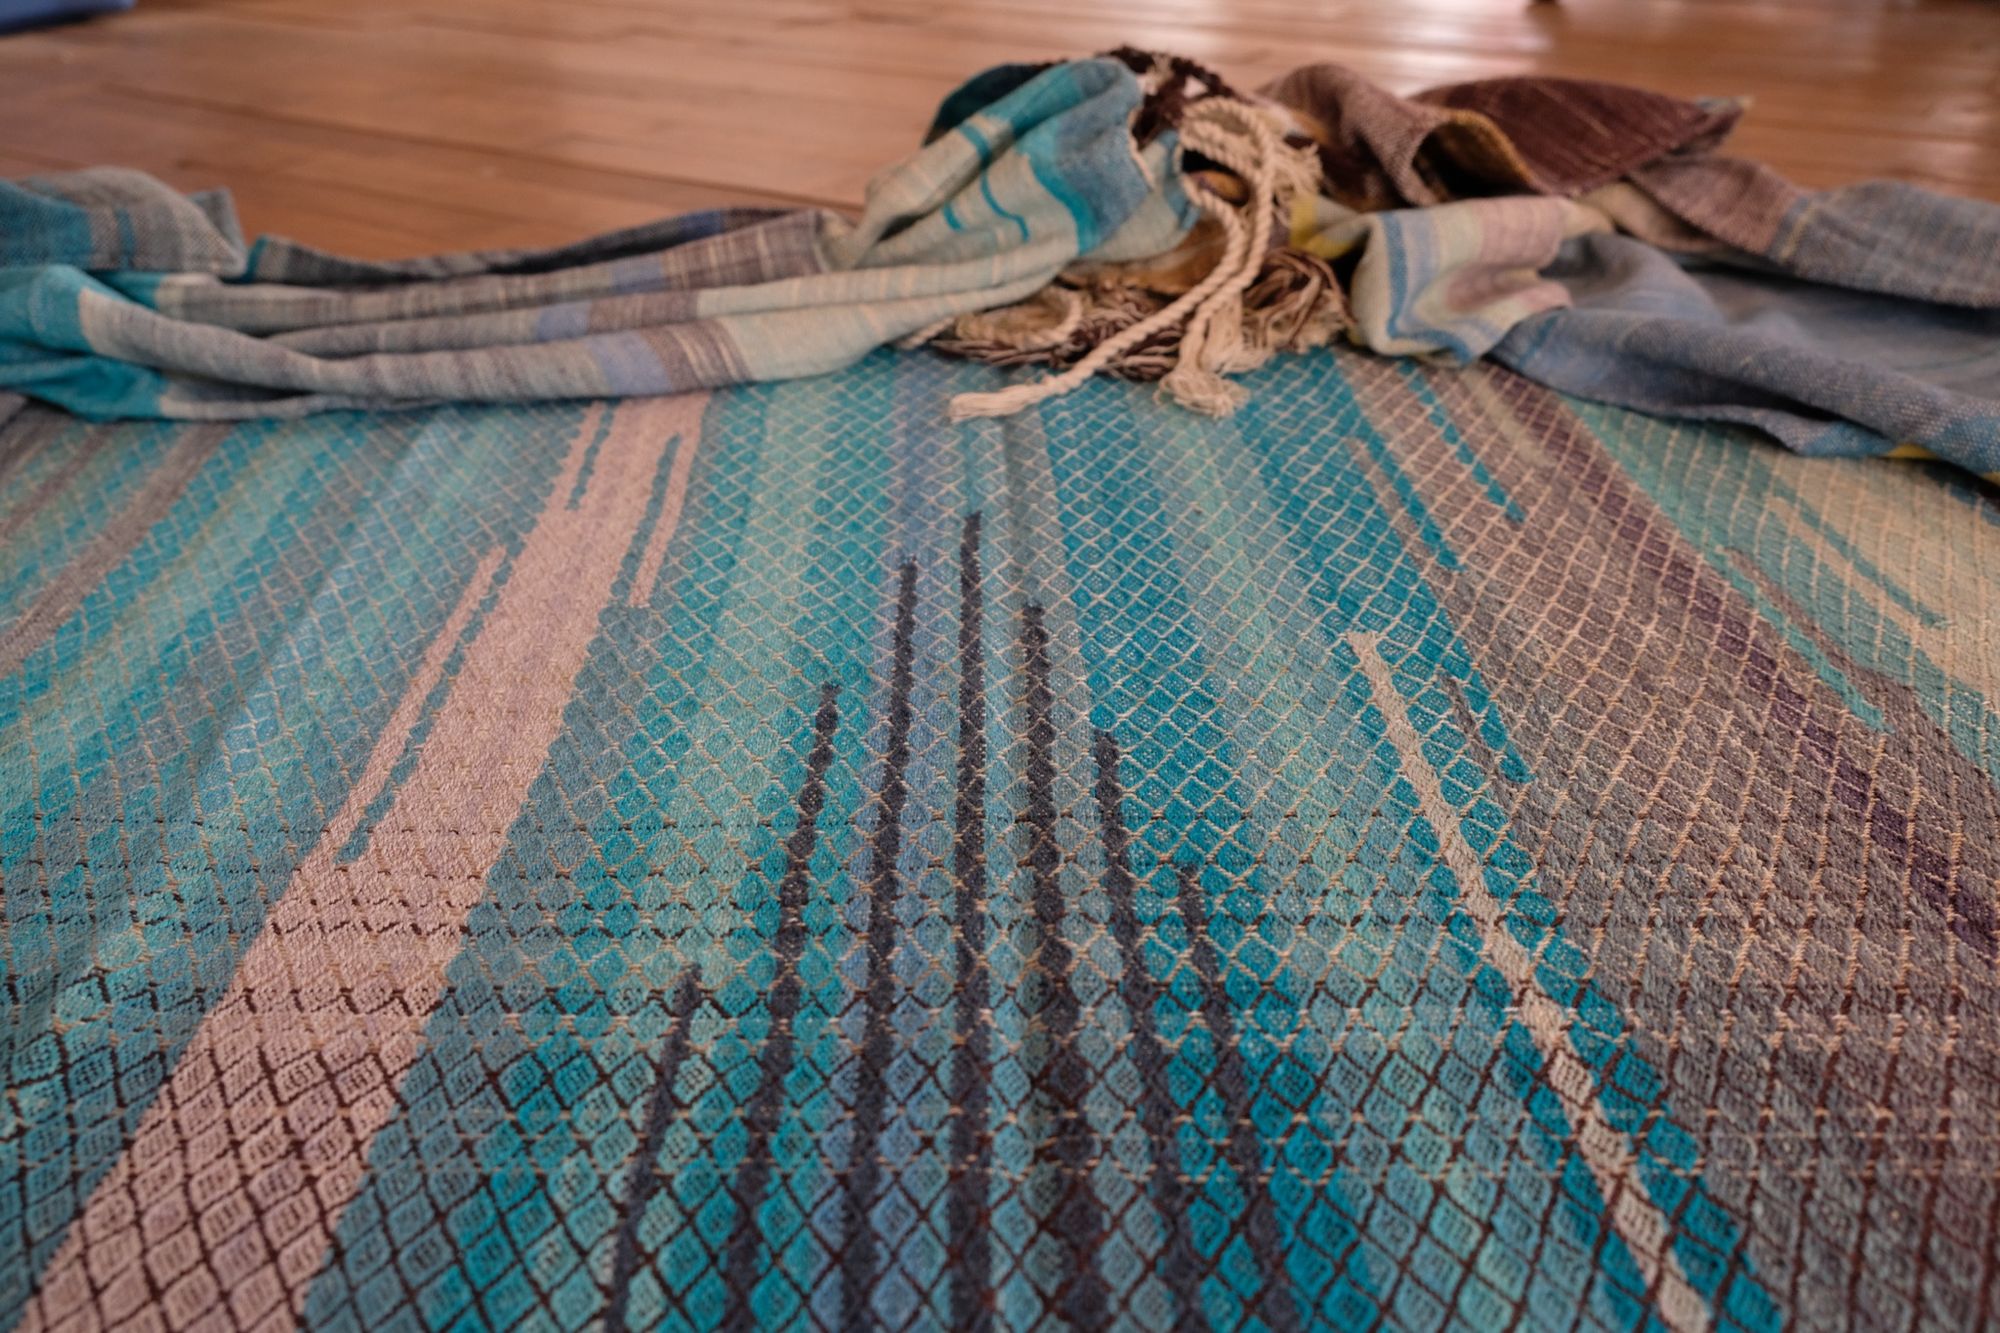 Handwoven fabric in all shades of blue, with details of white and golden yellow, laid out on a wood floor.